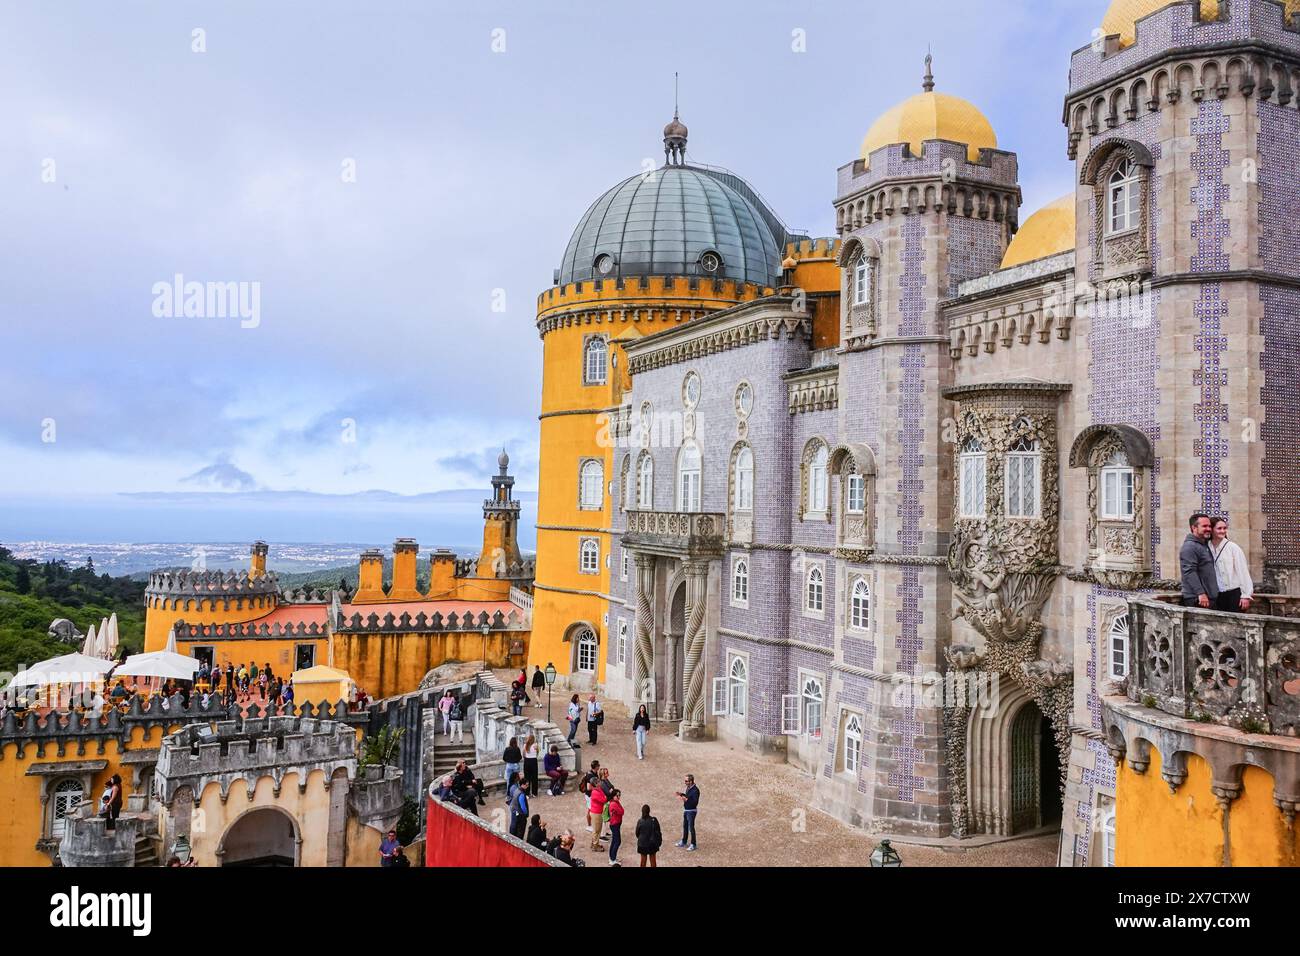 Eclectic styles of Pena Palace or Palácio da Pena historic palace castle viewed from the upper terrace in Sintra, Portugal. The fairytale castle palace is considered one of the finest examples of 19th century Portuguese Romanticism architecture in the world. Stock Photo